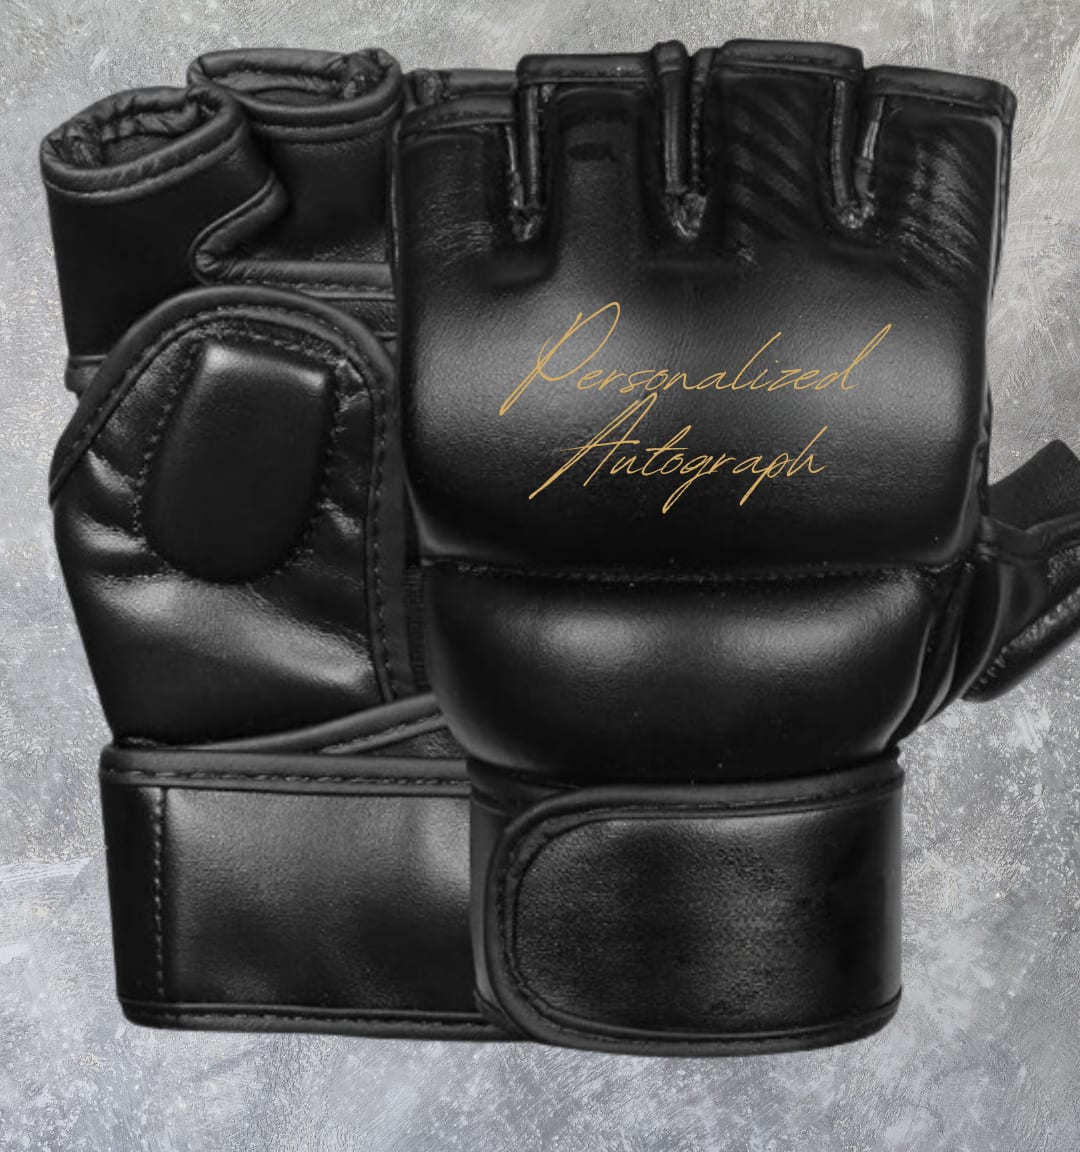 Limited Edition Mike Davis Autographed MMA Gloves